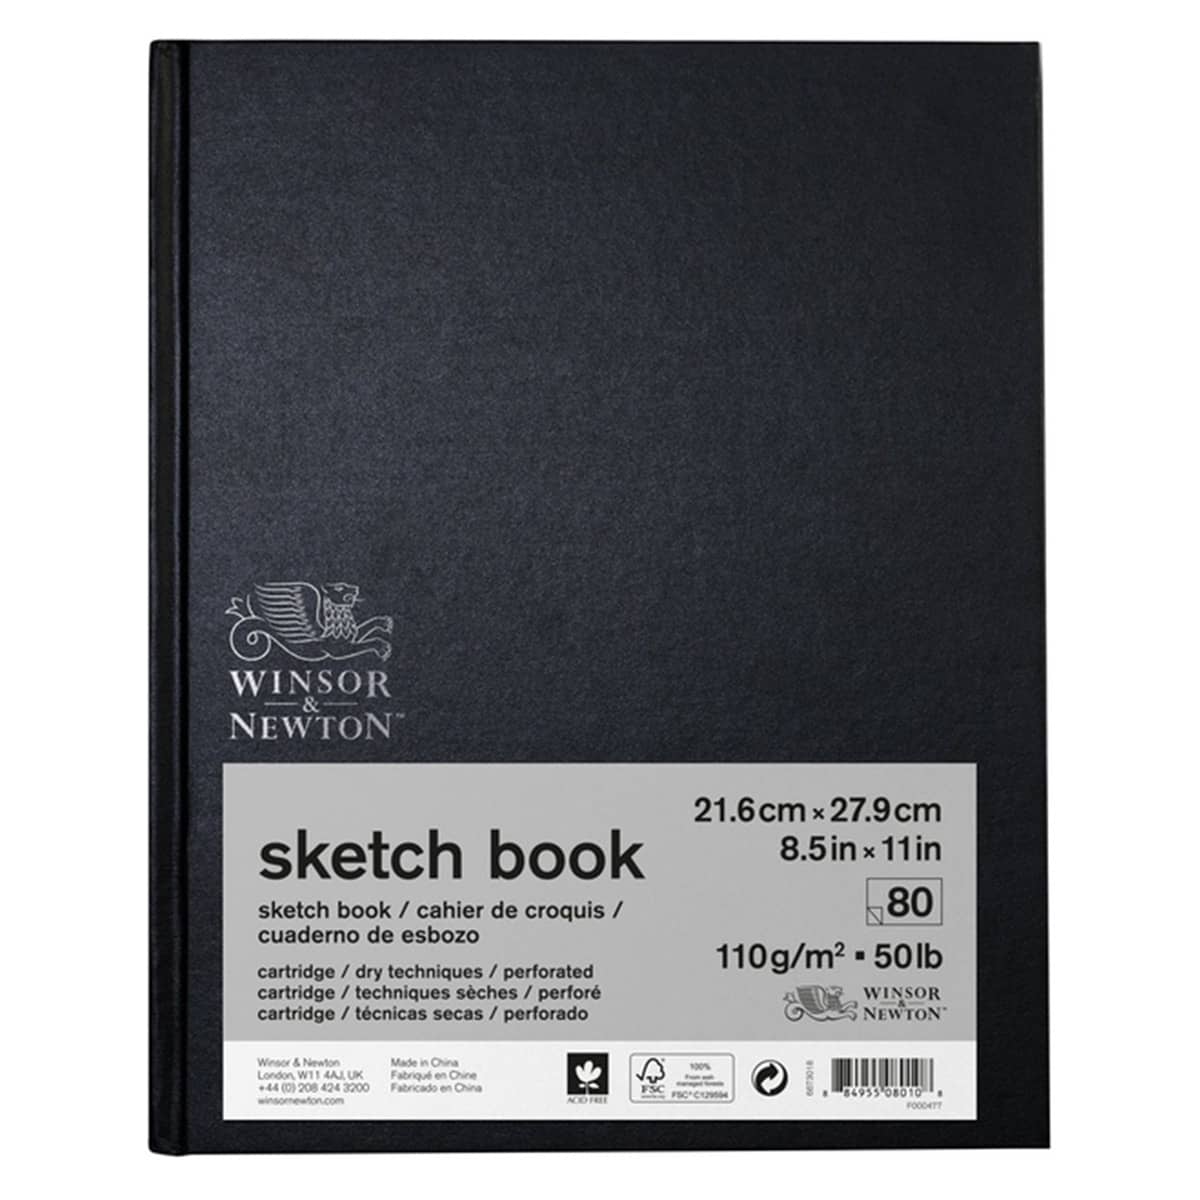 Self-Stick Notes 4x4 inch | Sticks to Any Surface Without Glue | Reusable White Dry Erase | 5 Pack, 500 Sheets (Assorted Colors, 4x4 Inches)